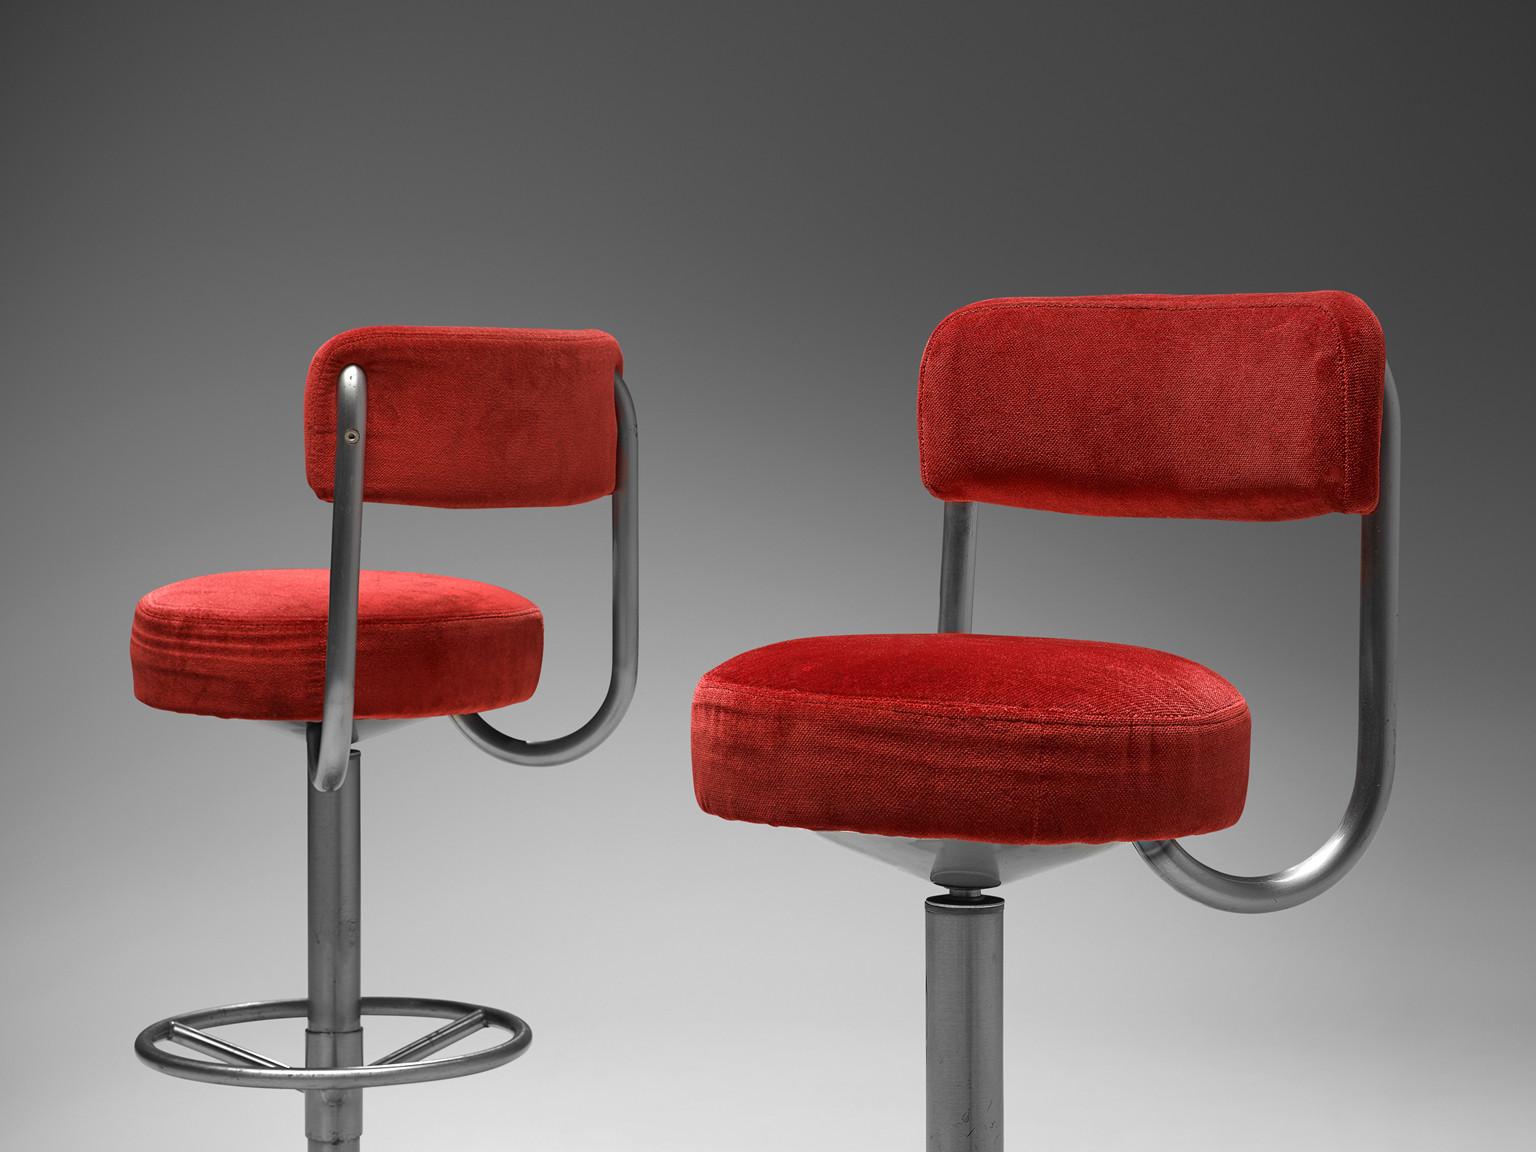 Borje Johanson for Johanson Design, pair of barstools as part of 'Johanson Jupiter Collection', in metal and red velvet, Sweden, 1970s.

Highly comfortable high barstools in red velvet upholstery. Due to the soft seat and back, these chairs